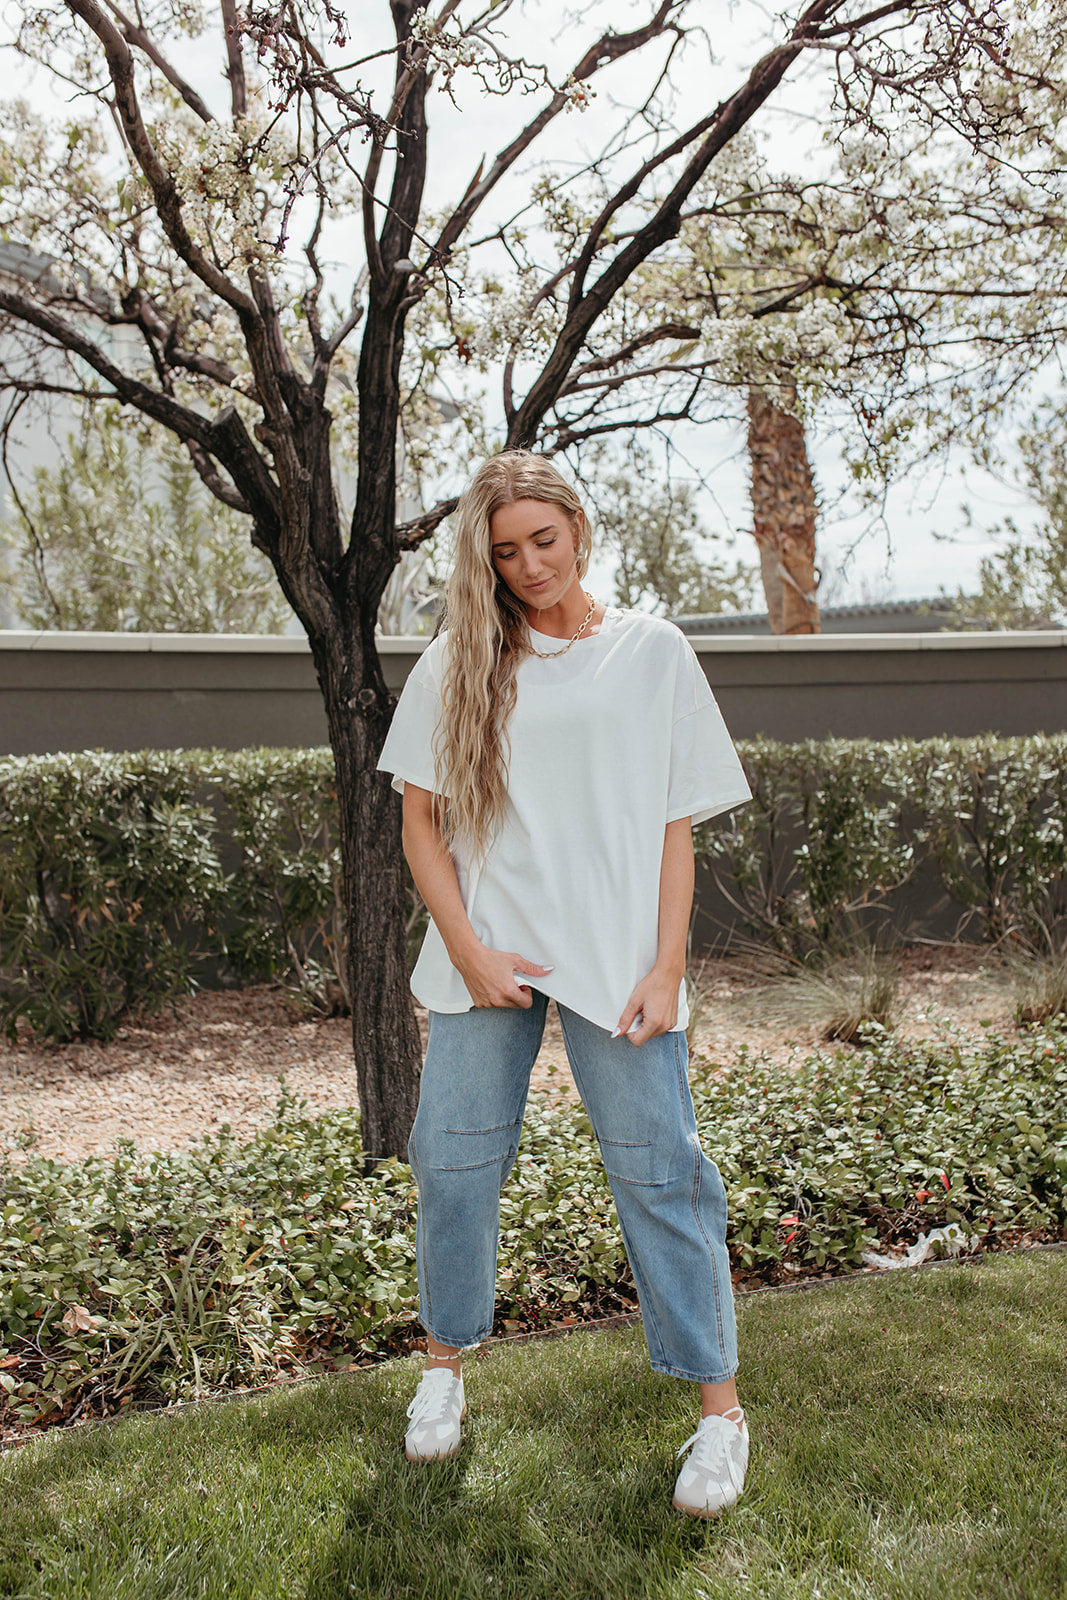 THE EVERYDAY TEE IN OFF WHITE